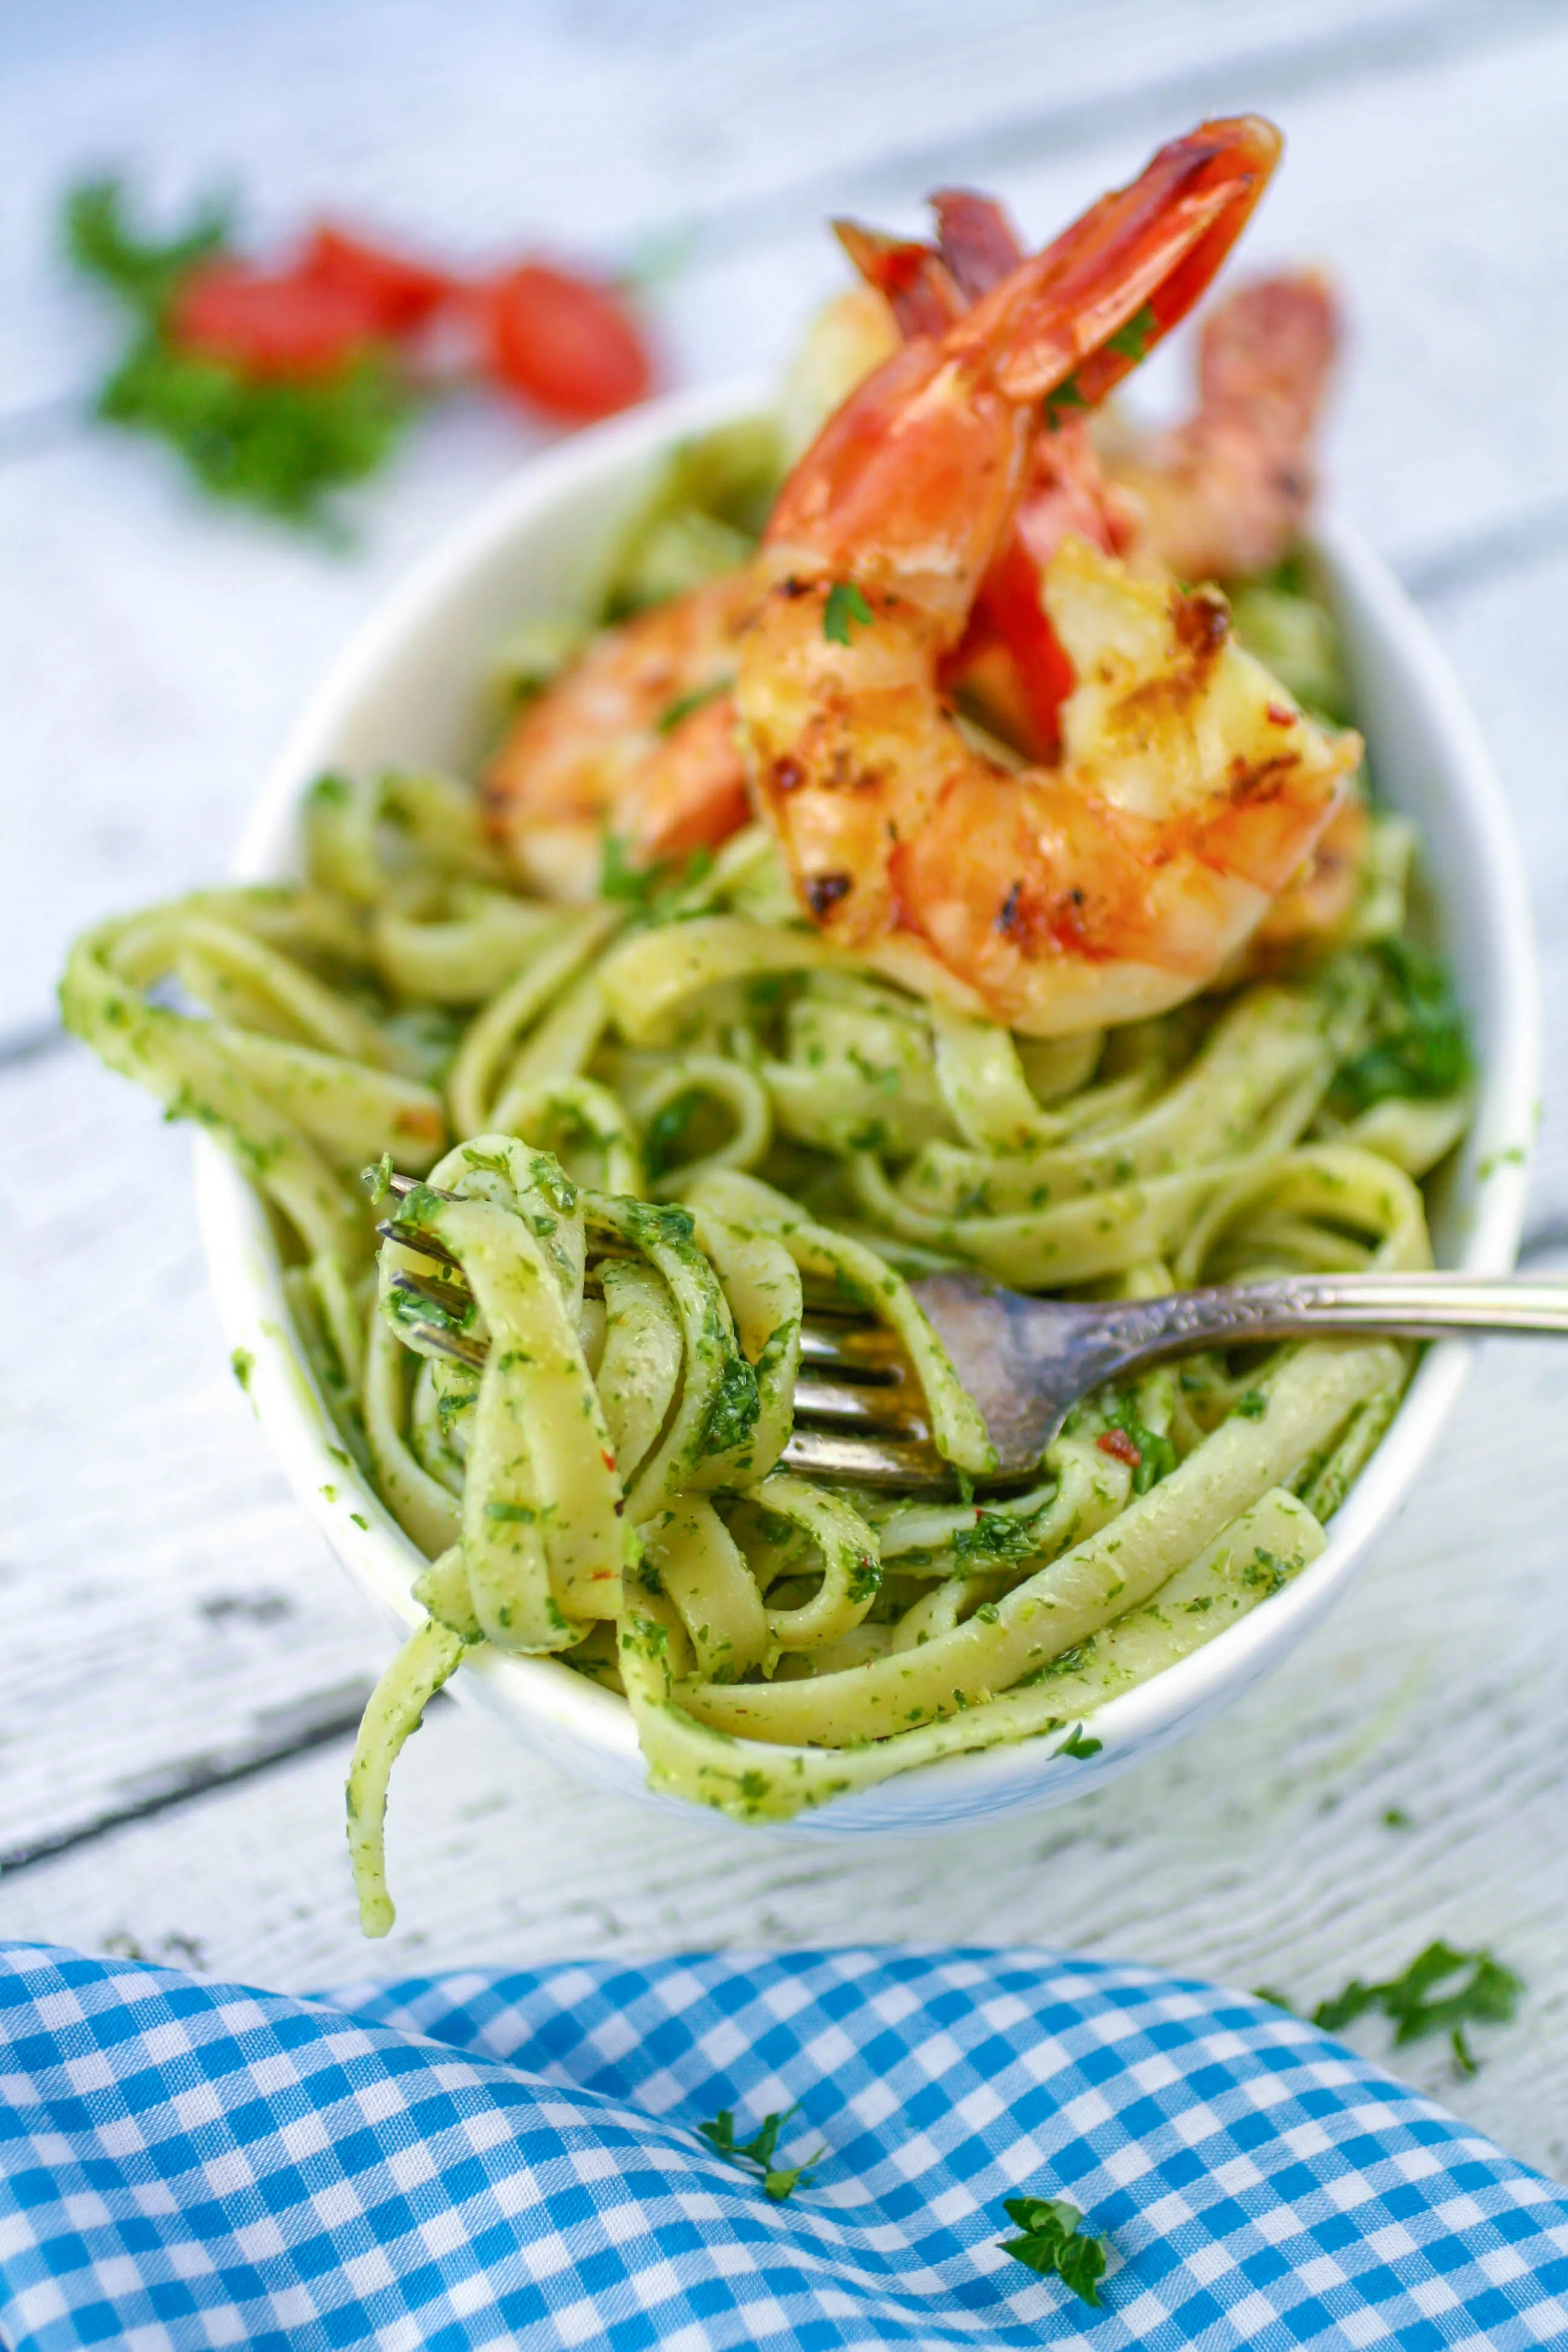 Chimichurri Pasta with Grilled Spicy Shrimp is a delight any night of the week. Enjoy Chimichurri Pasta with Grilled Spicy Shrimp for your next meal.